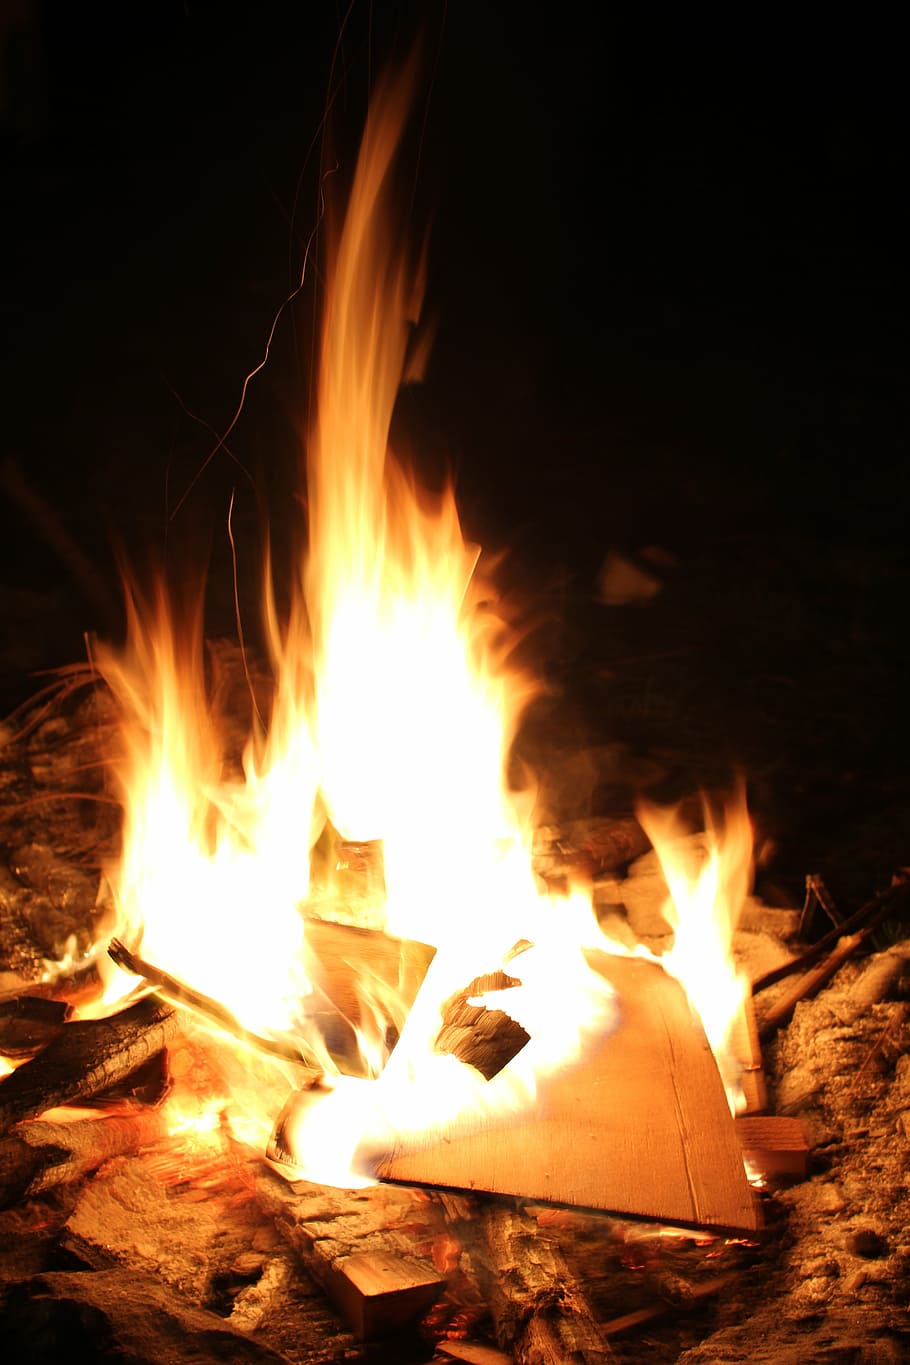 bonfire during night, fire, wood, camp, outdoor, cook, spark, green, grass, leaves